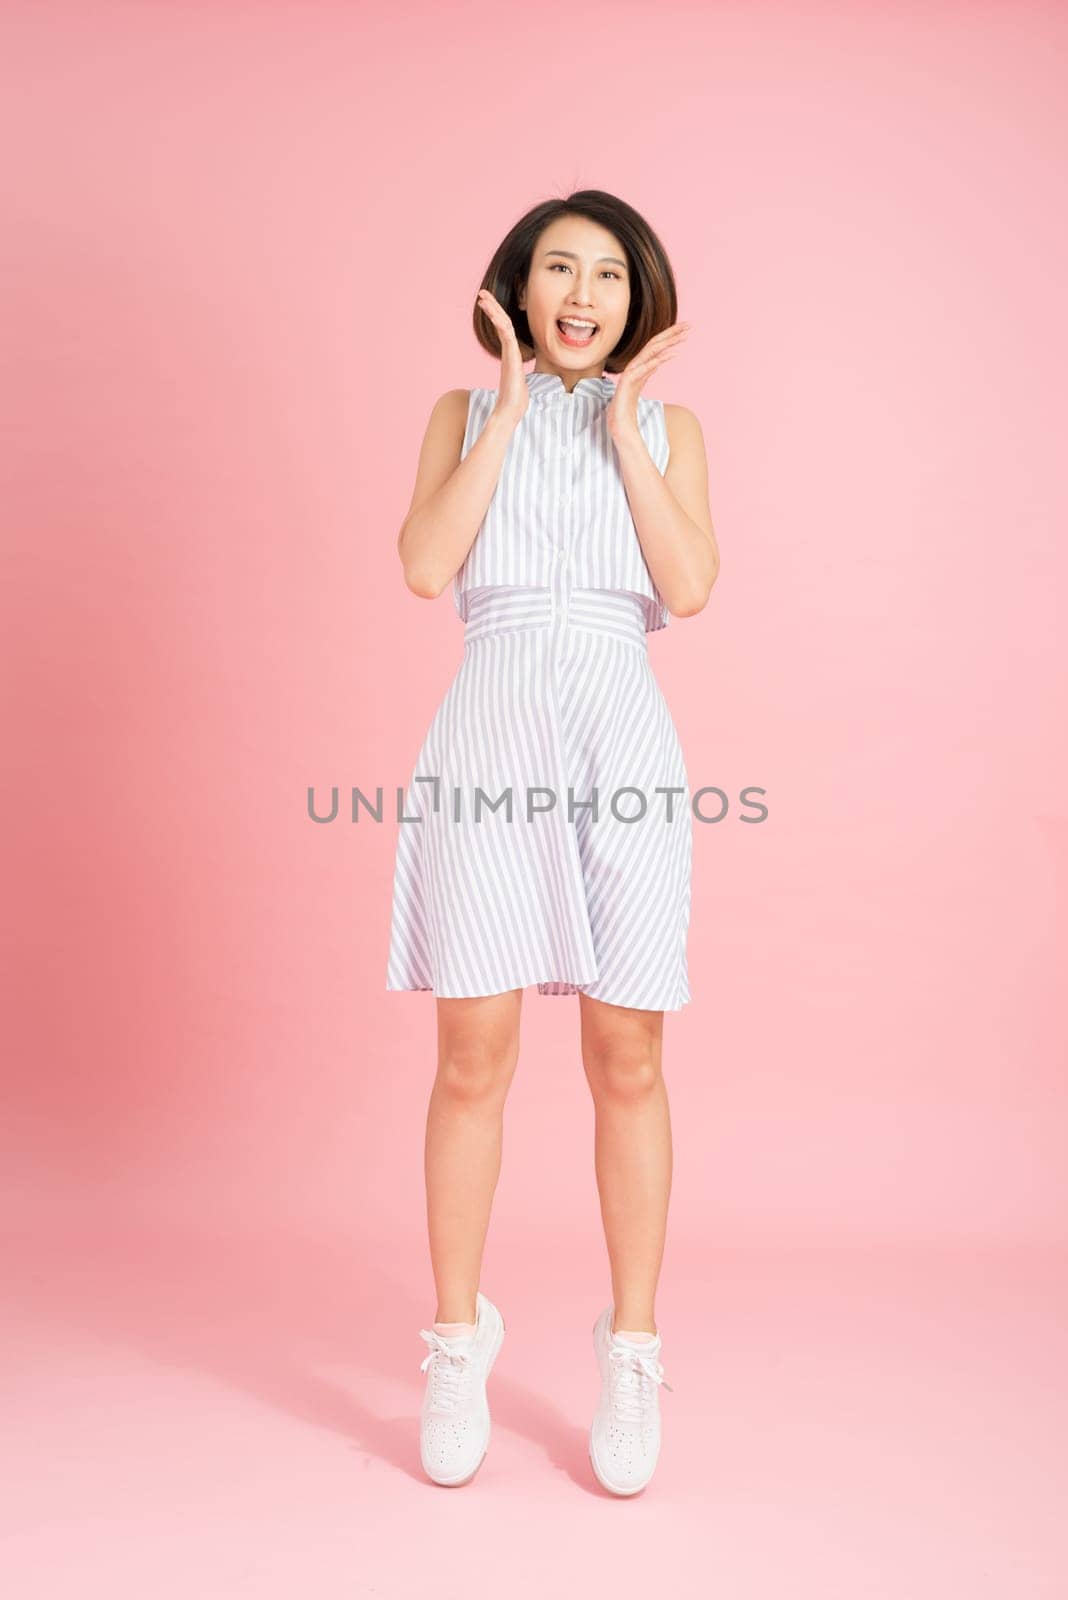 Vertical full length body size studio photo portrait of cute cool free fresh charming pretty attractive lady in light blue clothing feeling expressing happiness isolated bright pastel soft background by makidotvn